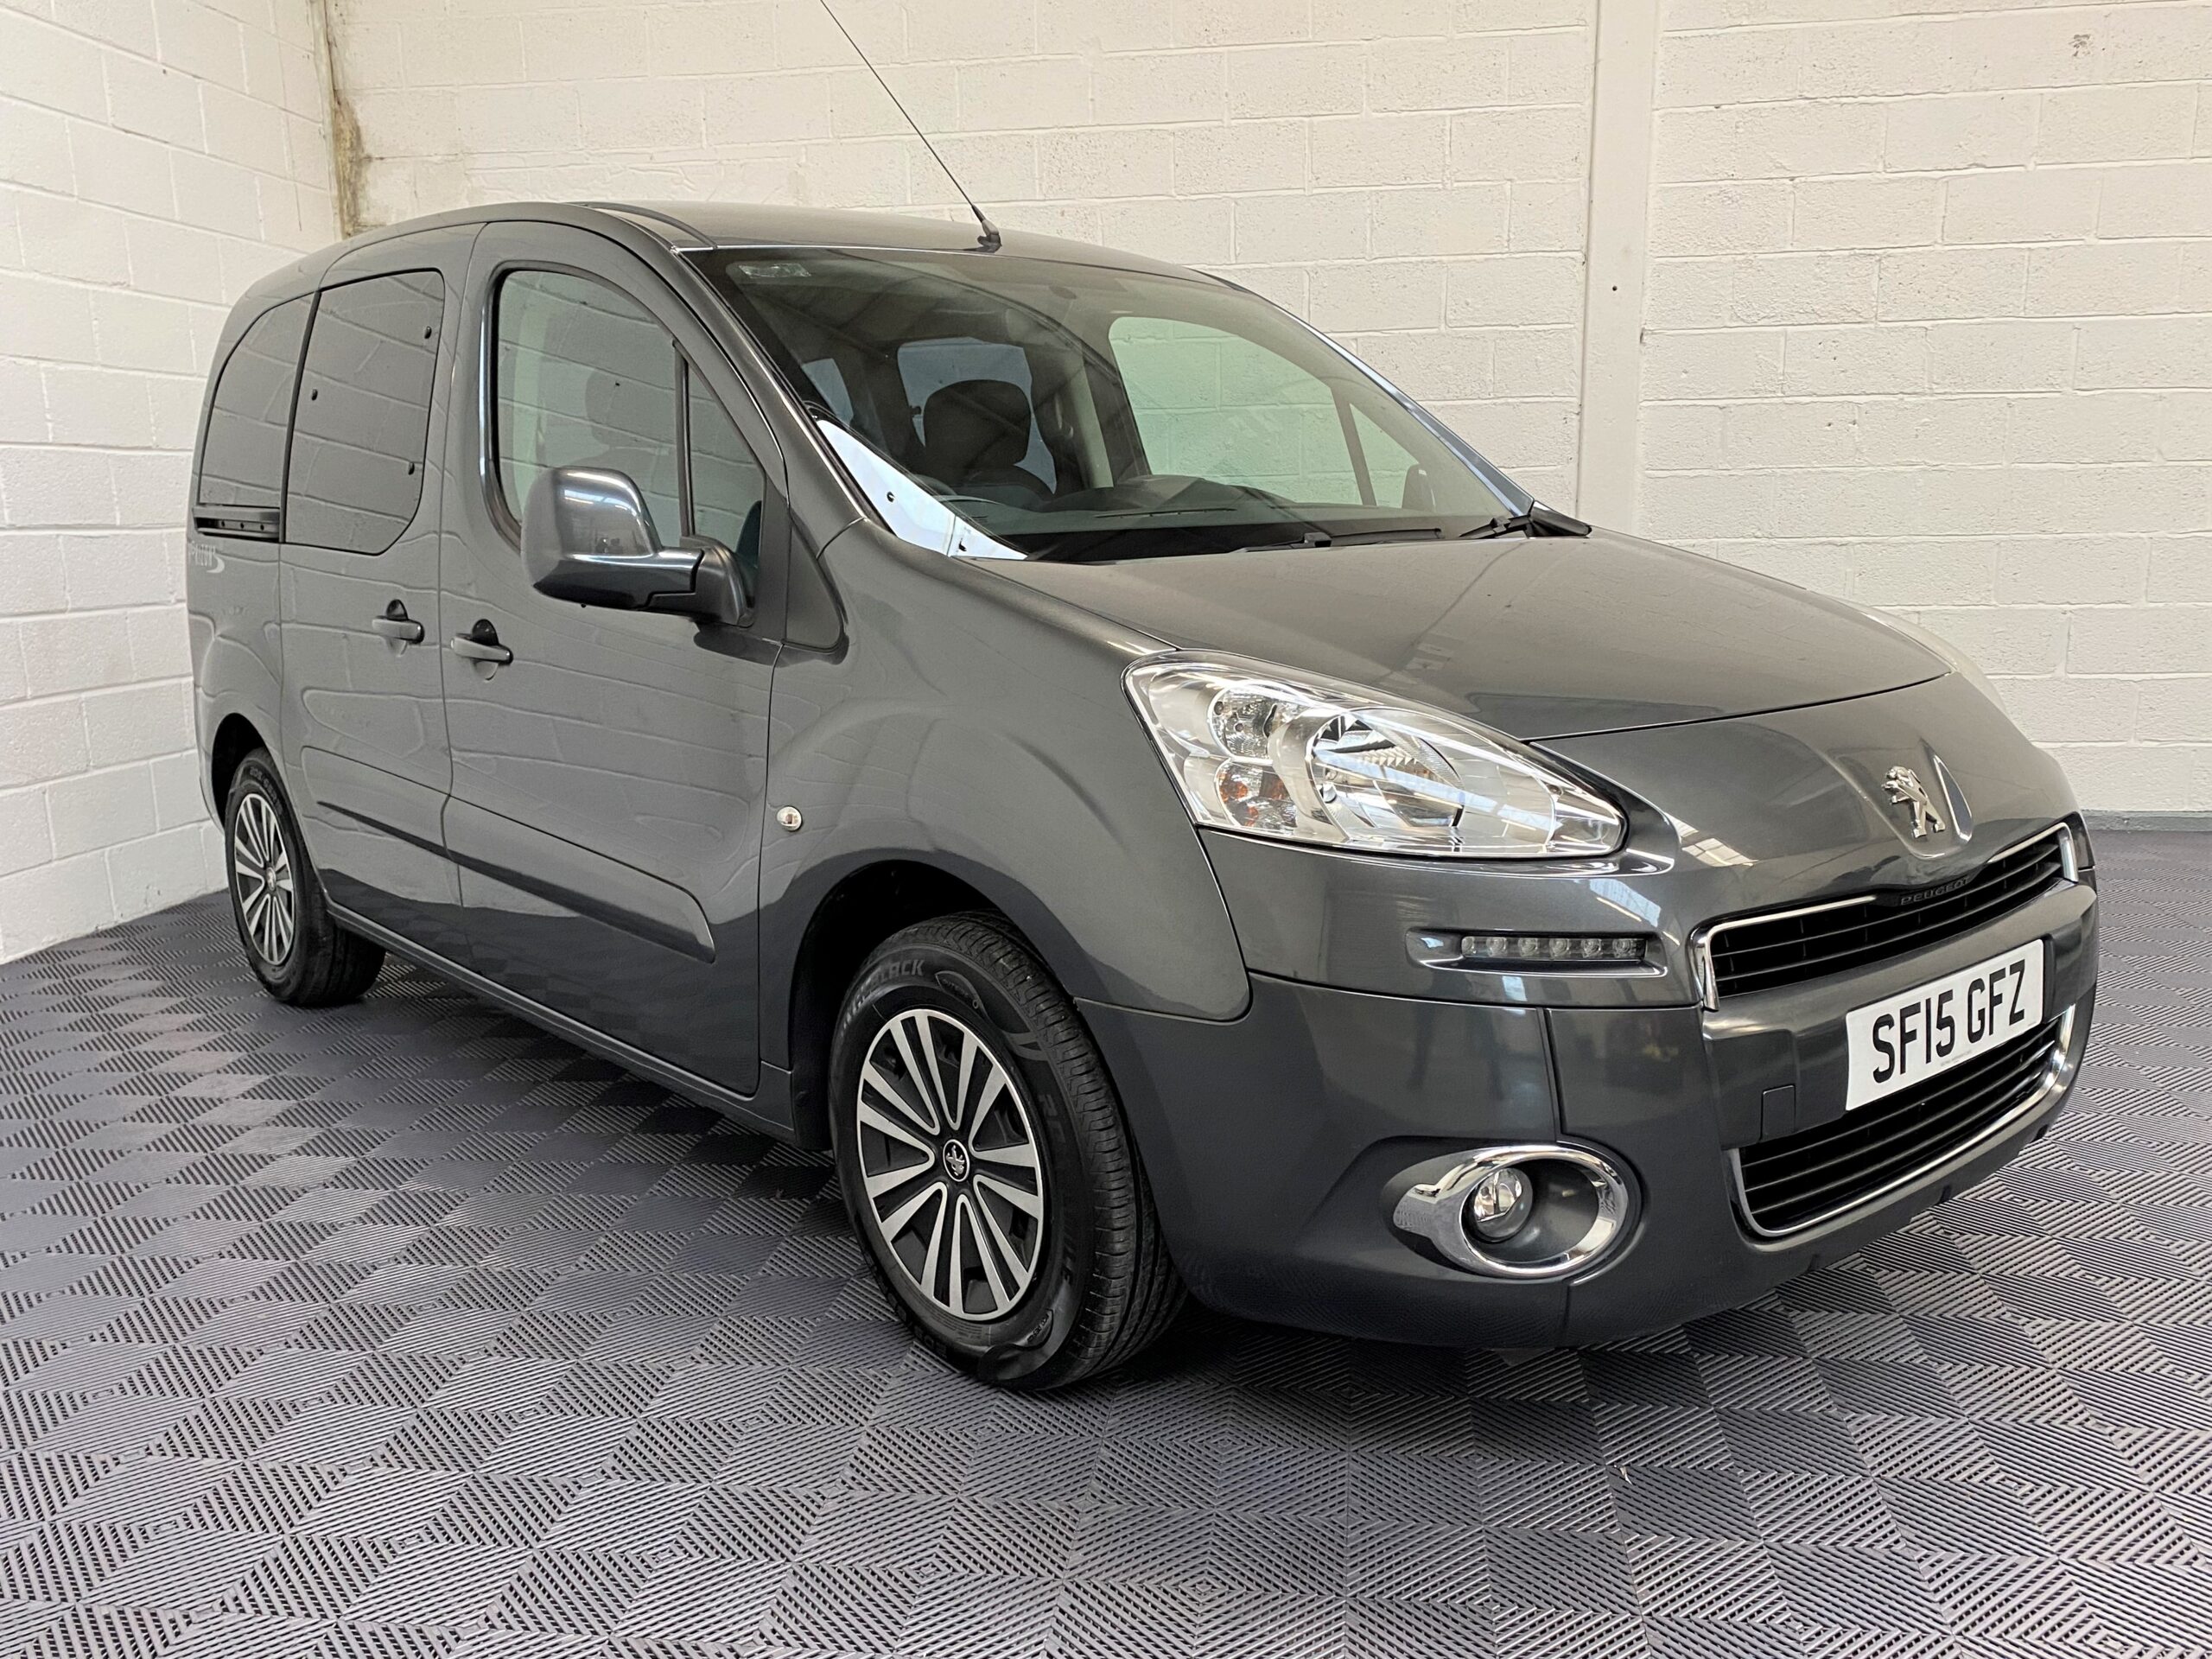 Used Peugeot Partner Auto WAV Cars For Sale Bristol Wheelchair Accessible Vehicles Used For Sale Somerset Devon Dorset Bath SF15 GFZ 7